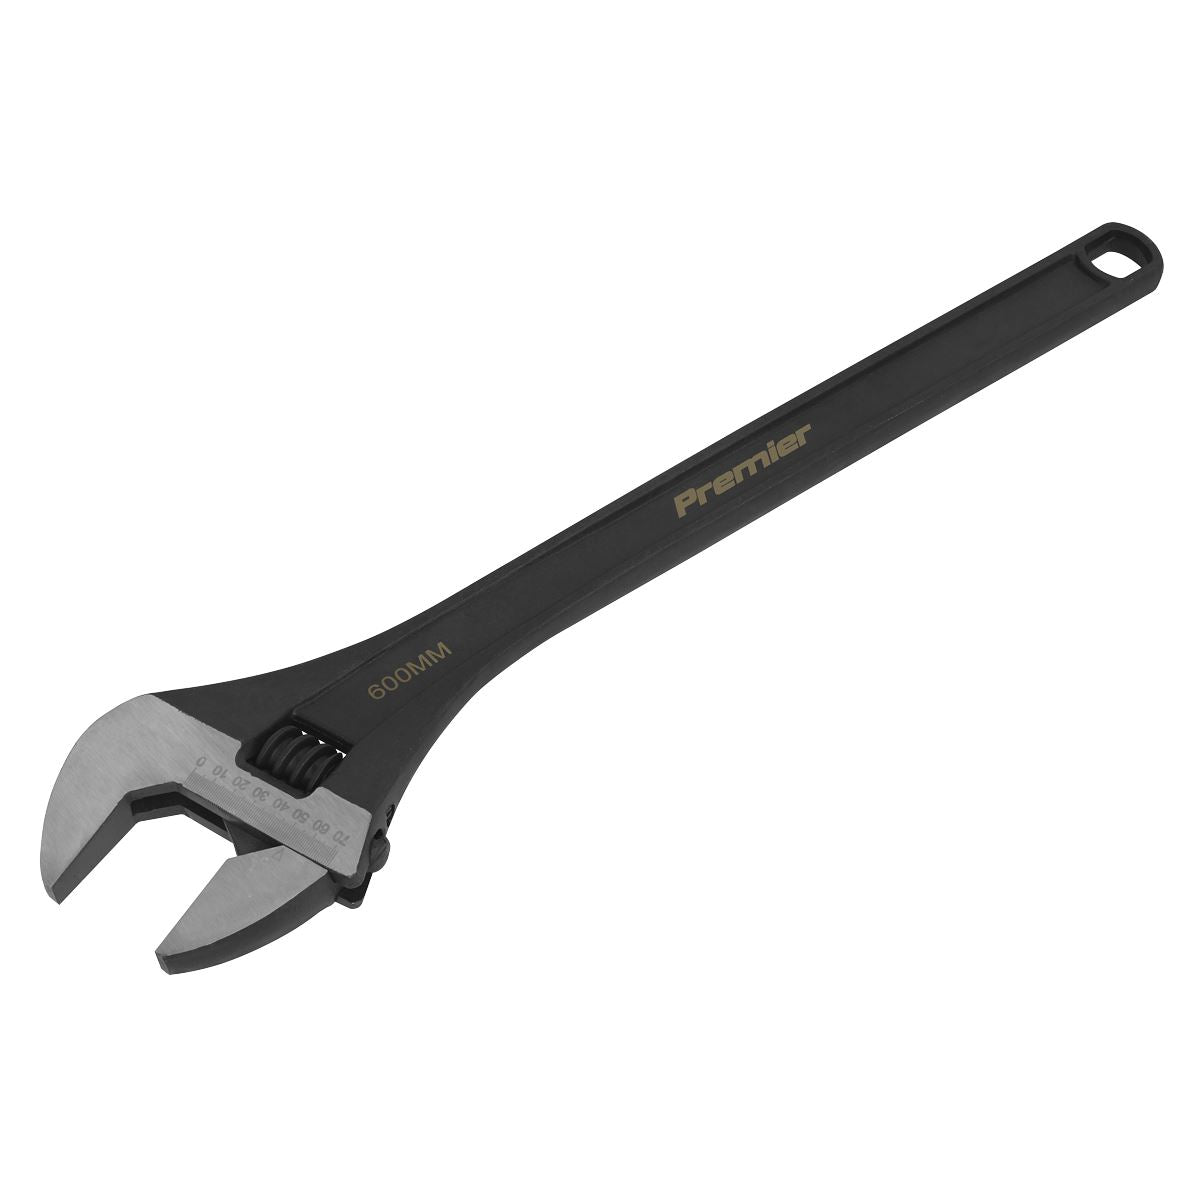 Sealey Premier Adjustable Wrench 600mm Jaw Capacity 60mm